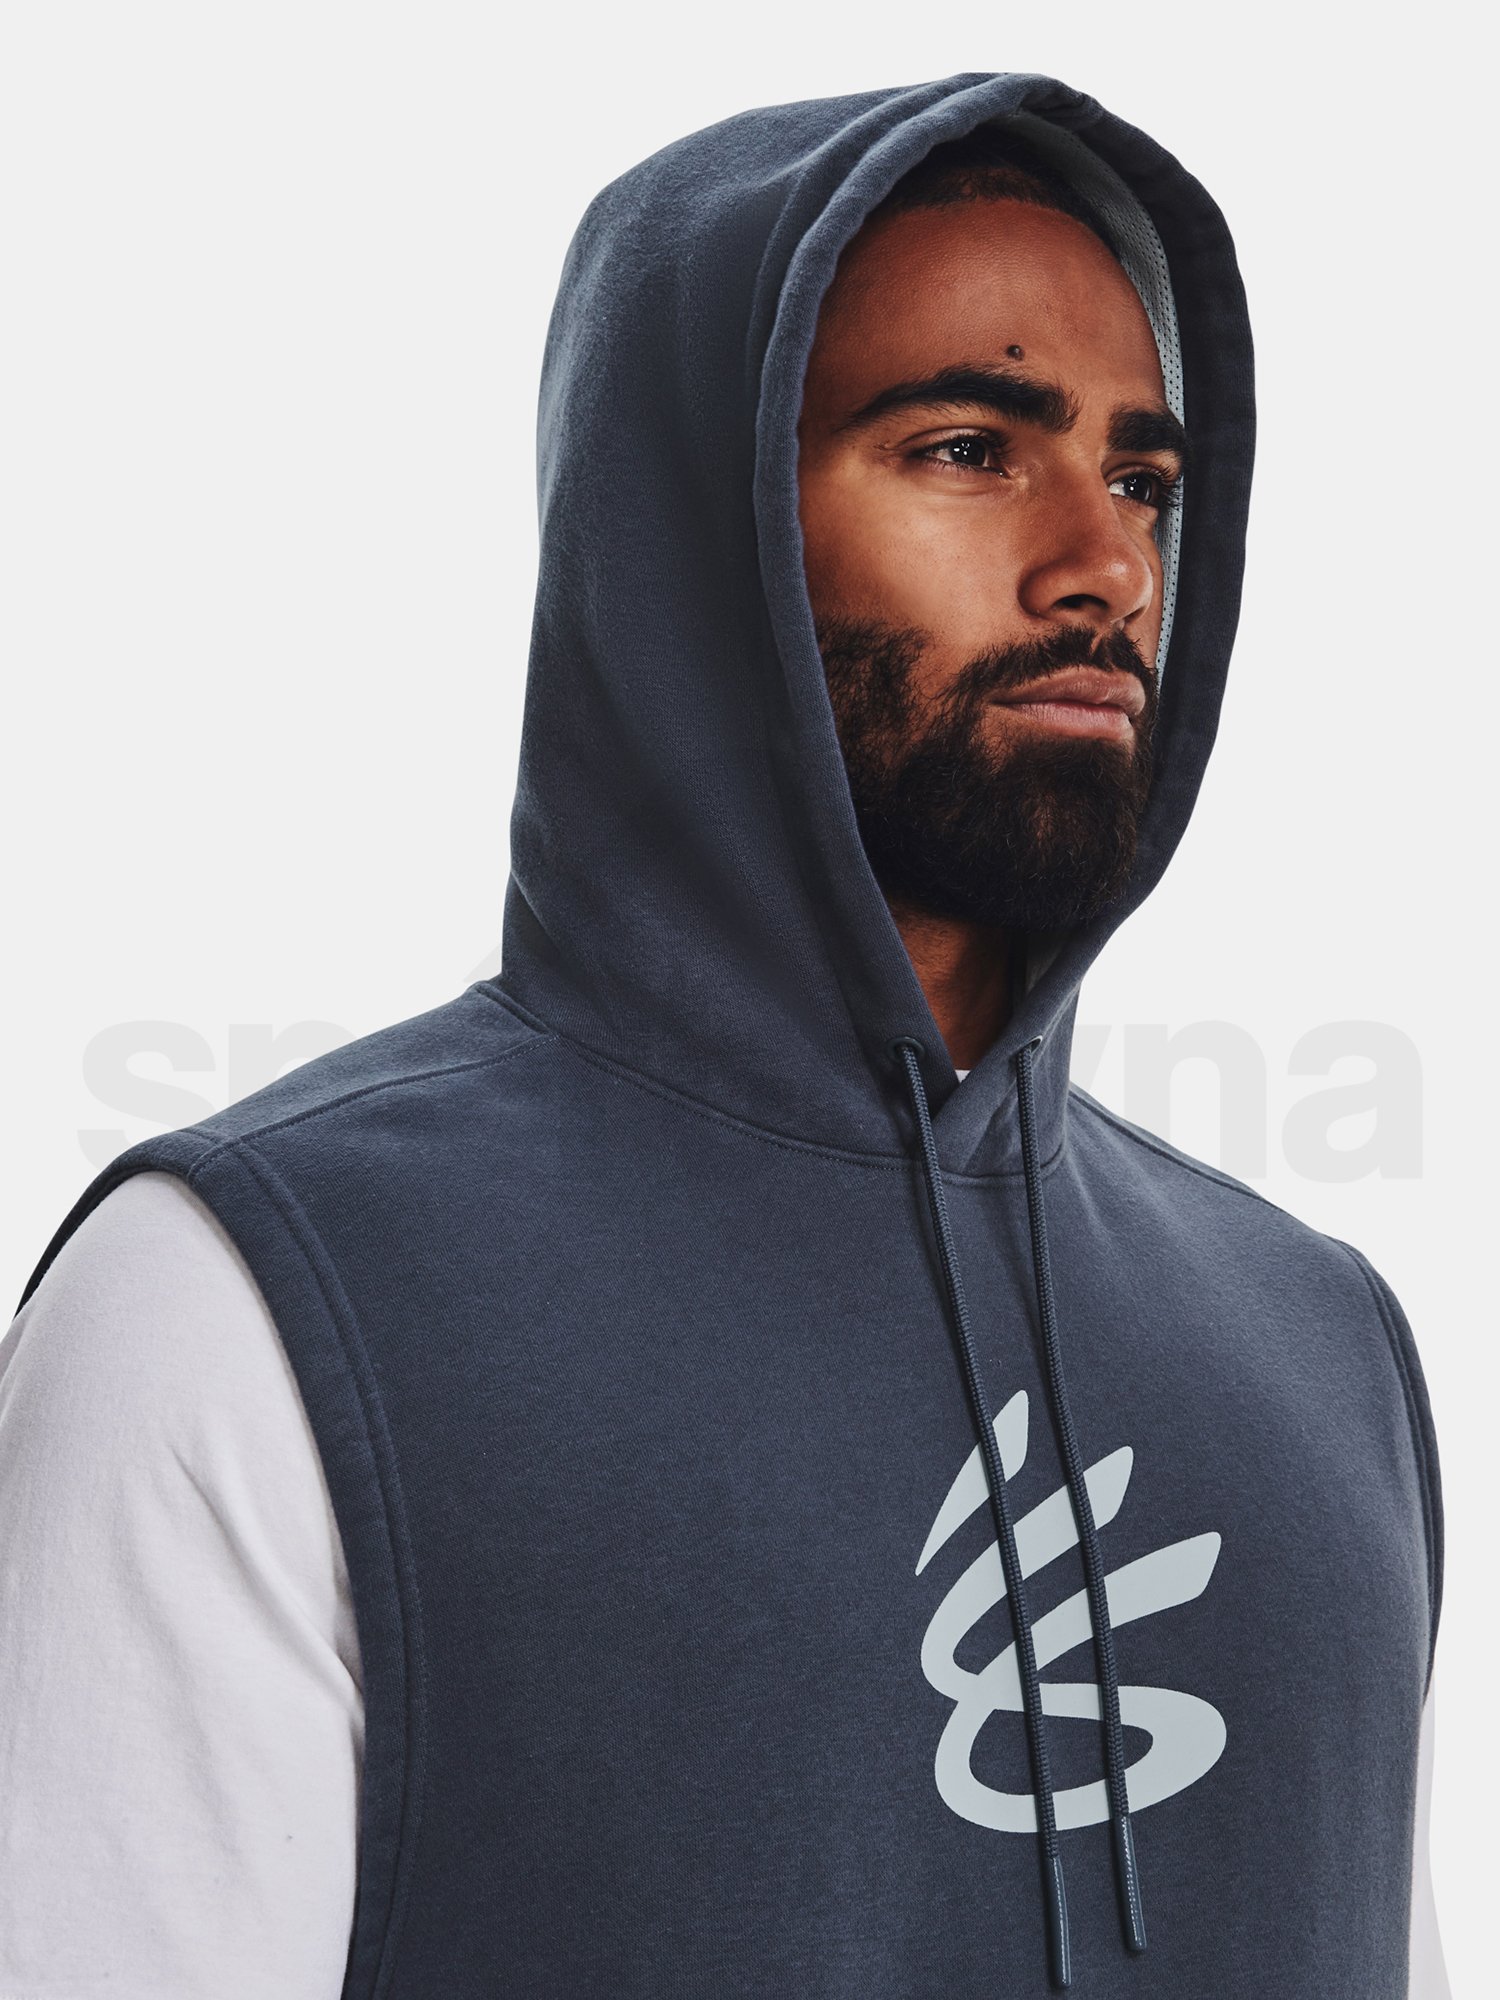 Mikina Under Armour Curry Fleece SLVLS Hoodie-GRY